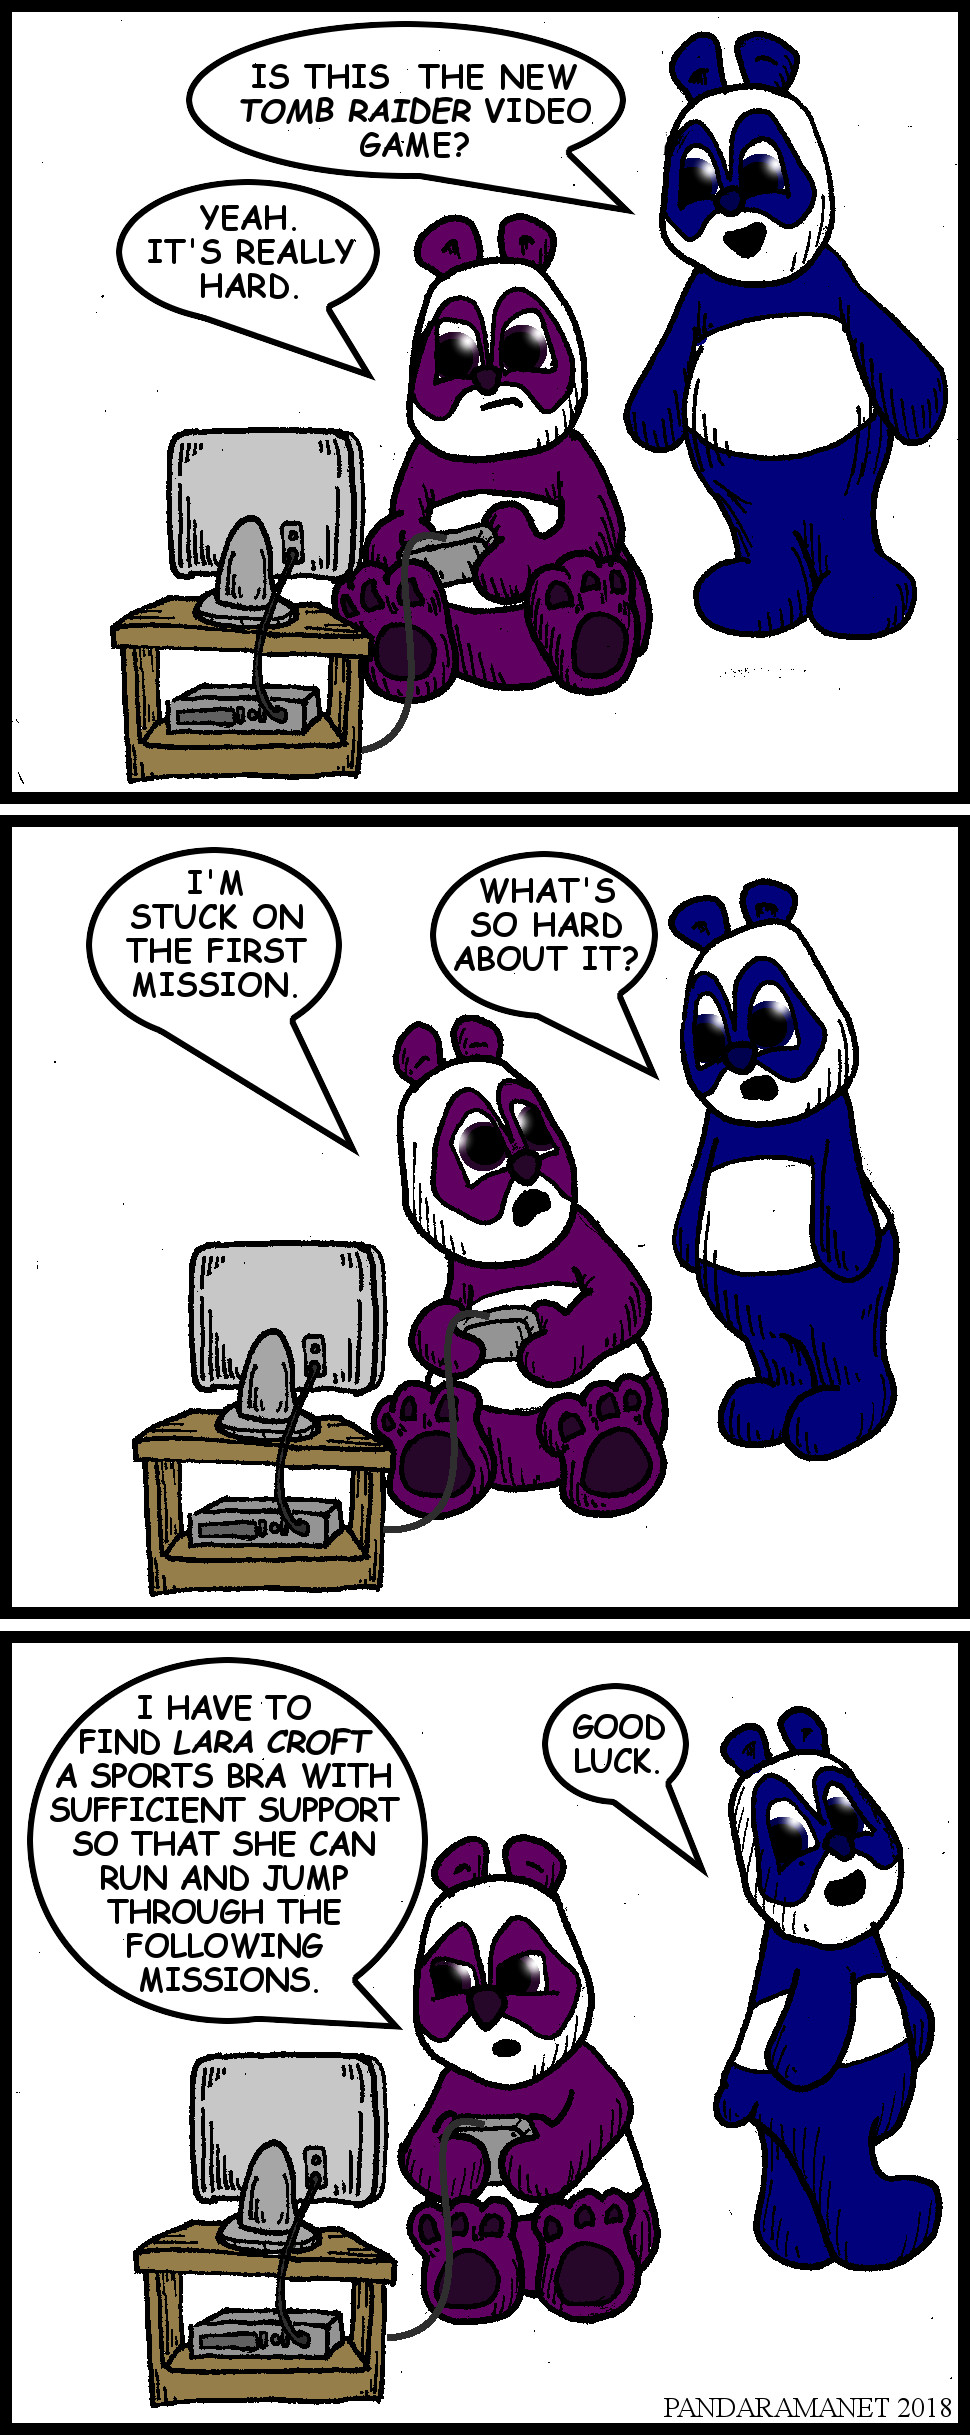 comicstrip where panda is stuck on first level of tomb raider video game, finding a sports bra for lara croft.